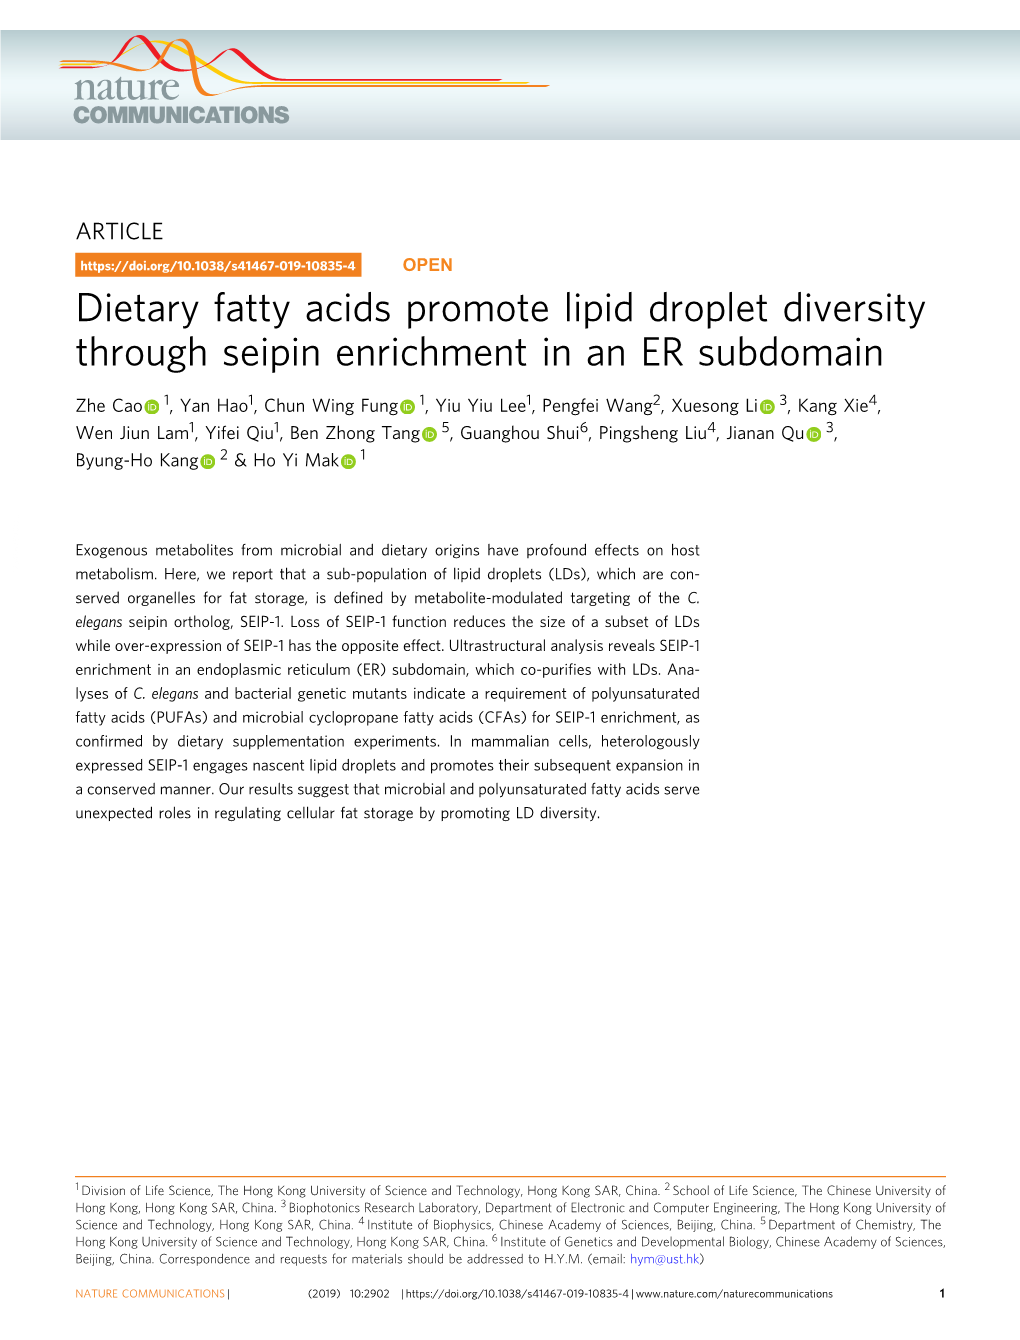 Dietary Fatty Acids Promote Lipid Droplet Diversity Through Seipin Enrichment in an ER Subdomain